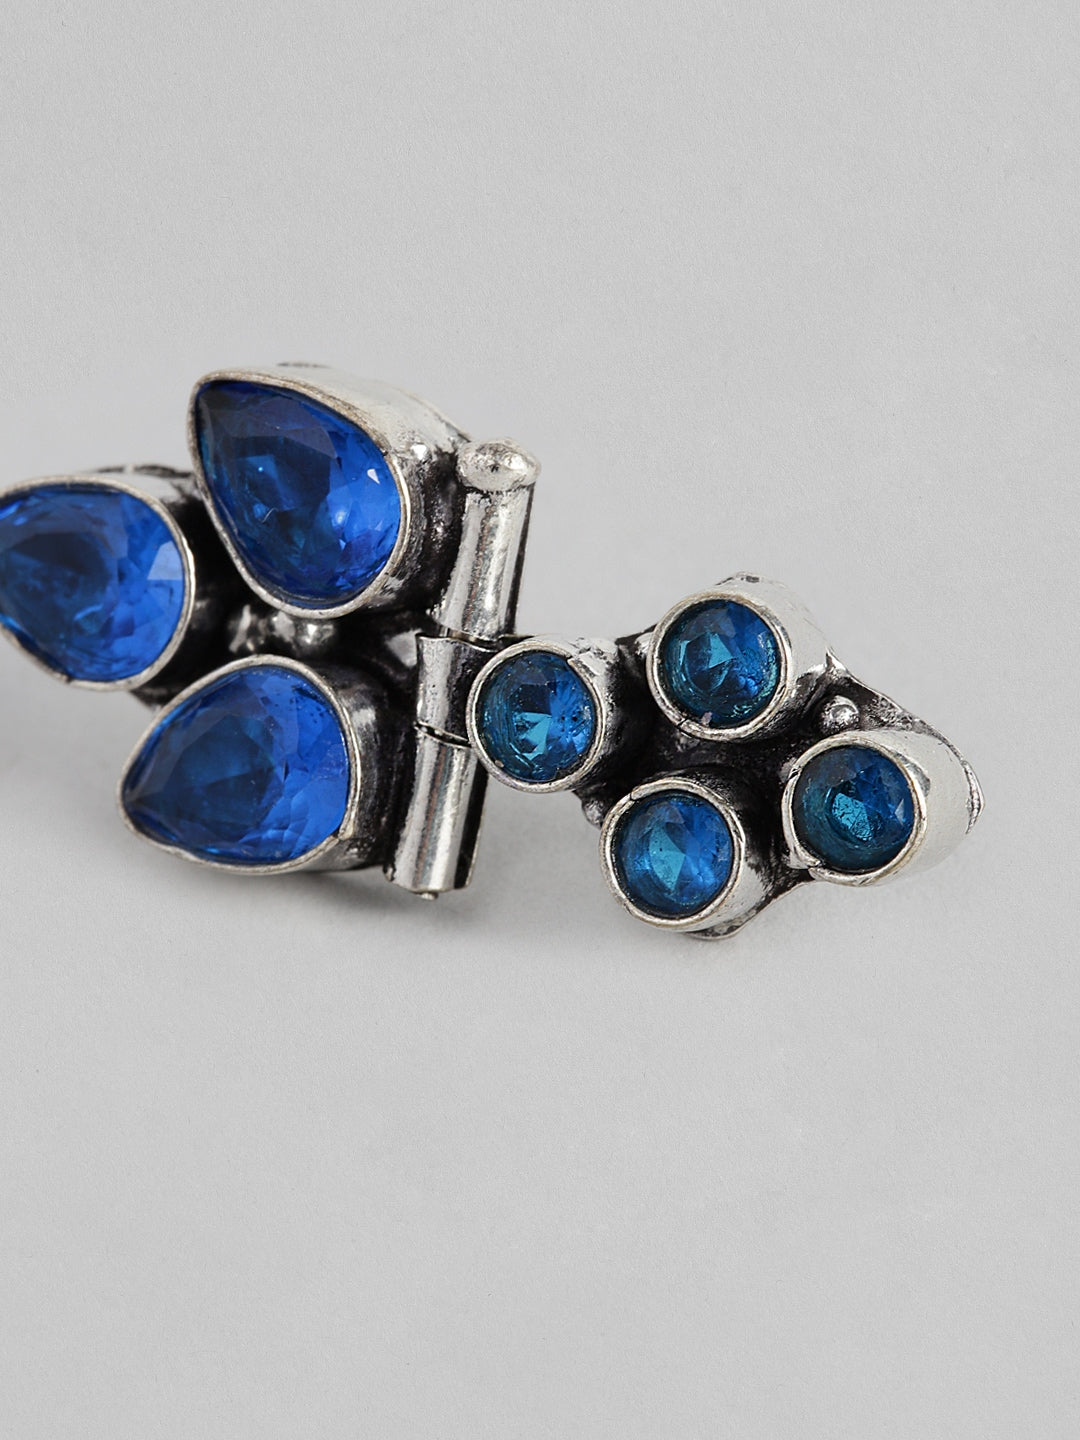 EL REGALO Blue & Silver-Toned Seven Stone Studs Earrings - for Women and Girls
Style ID: 16287446